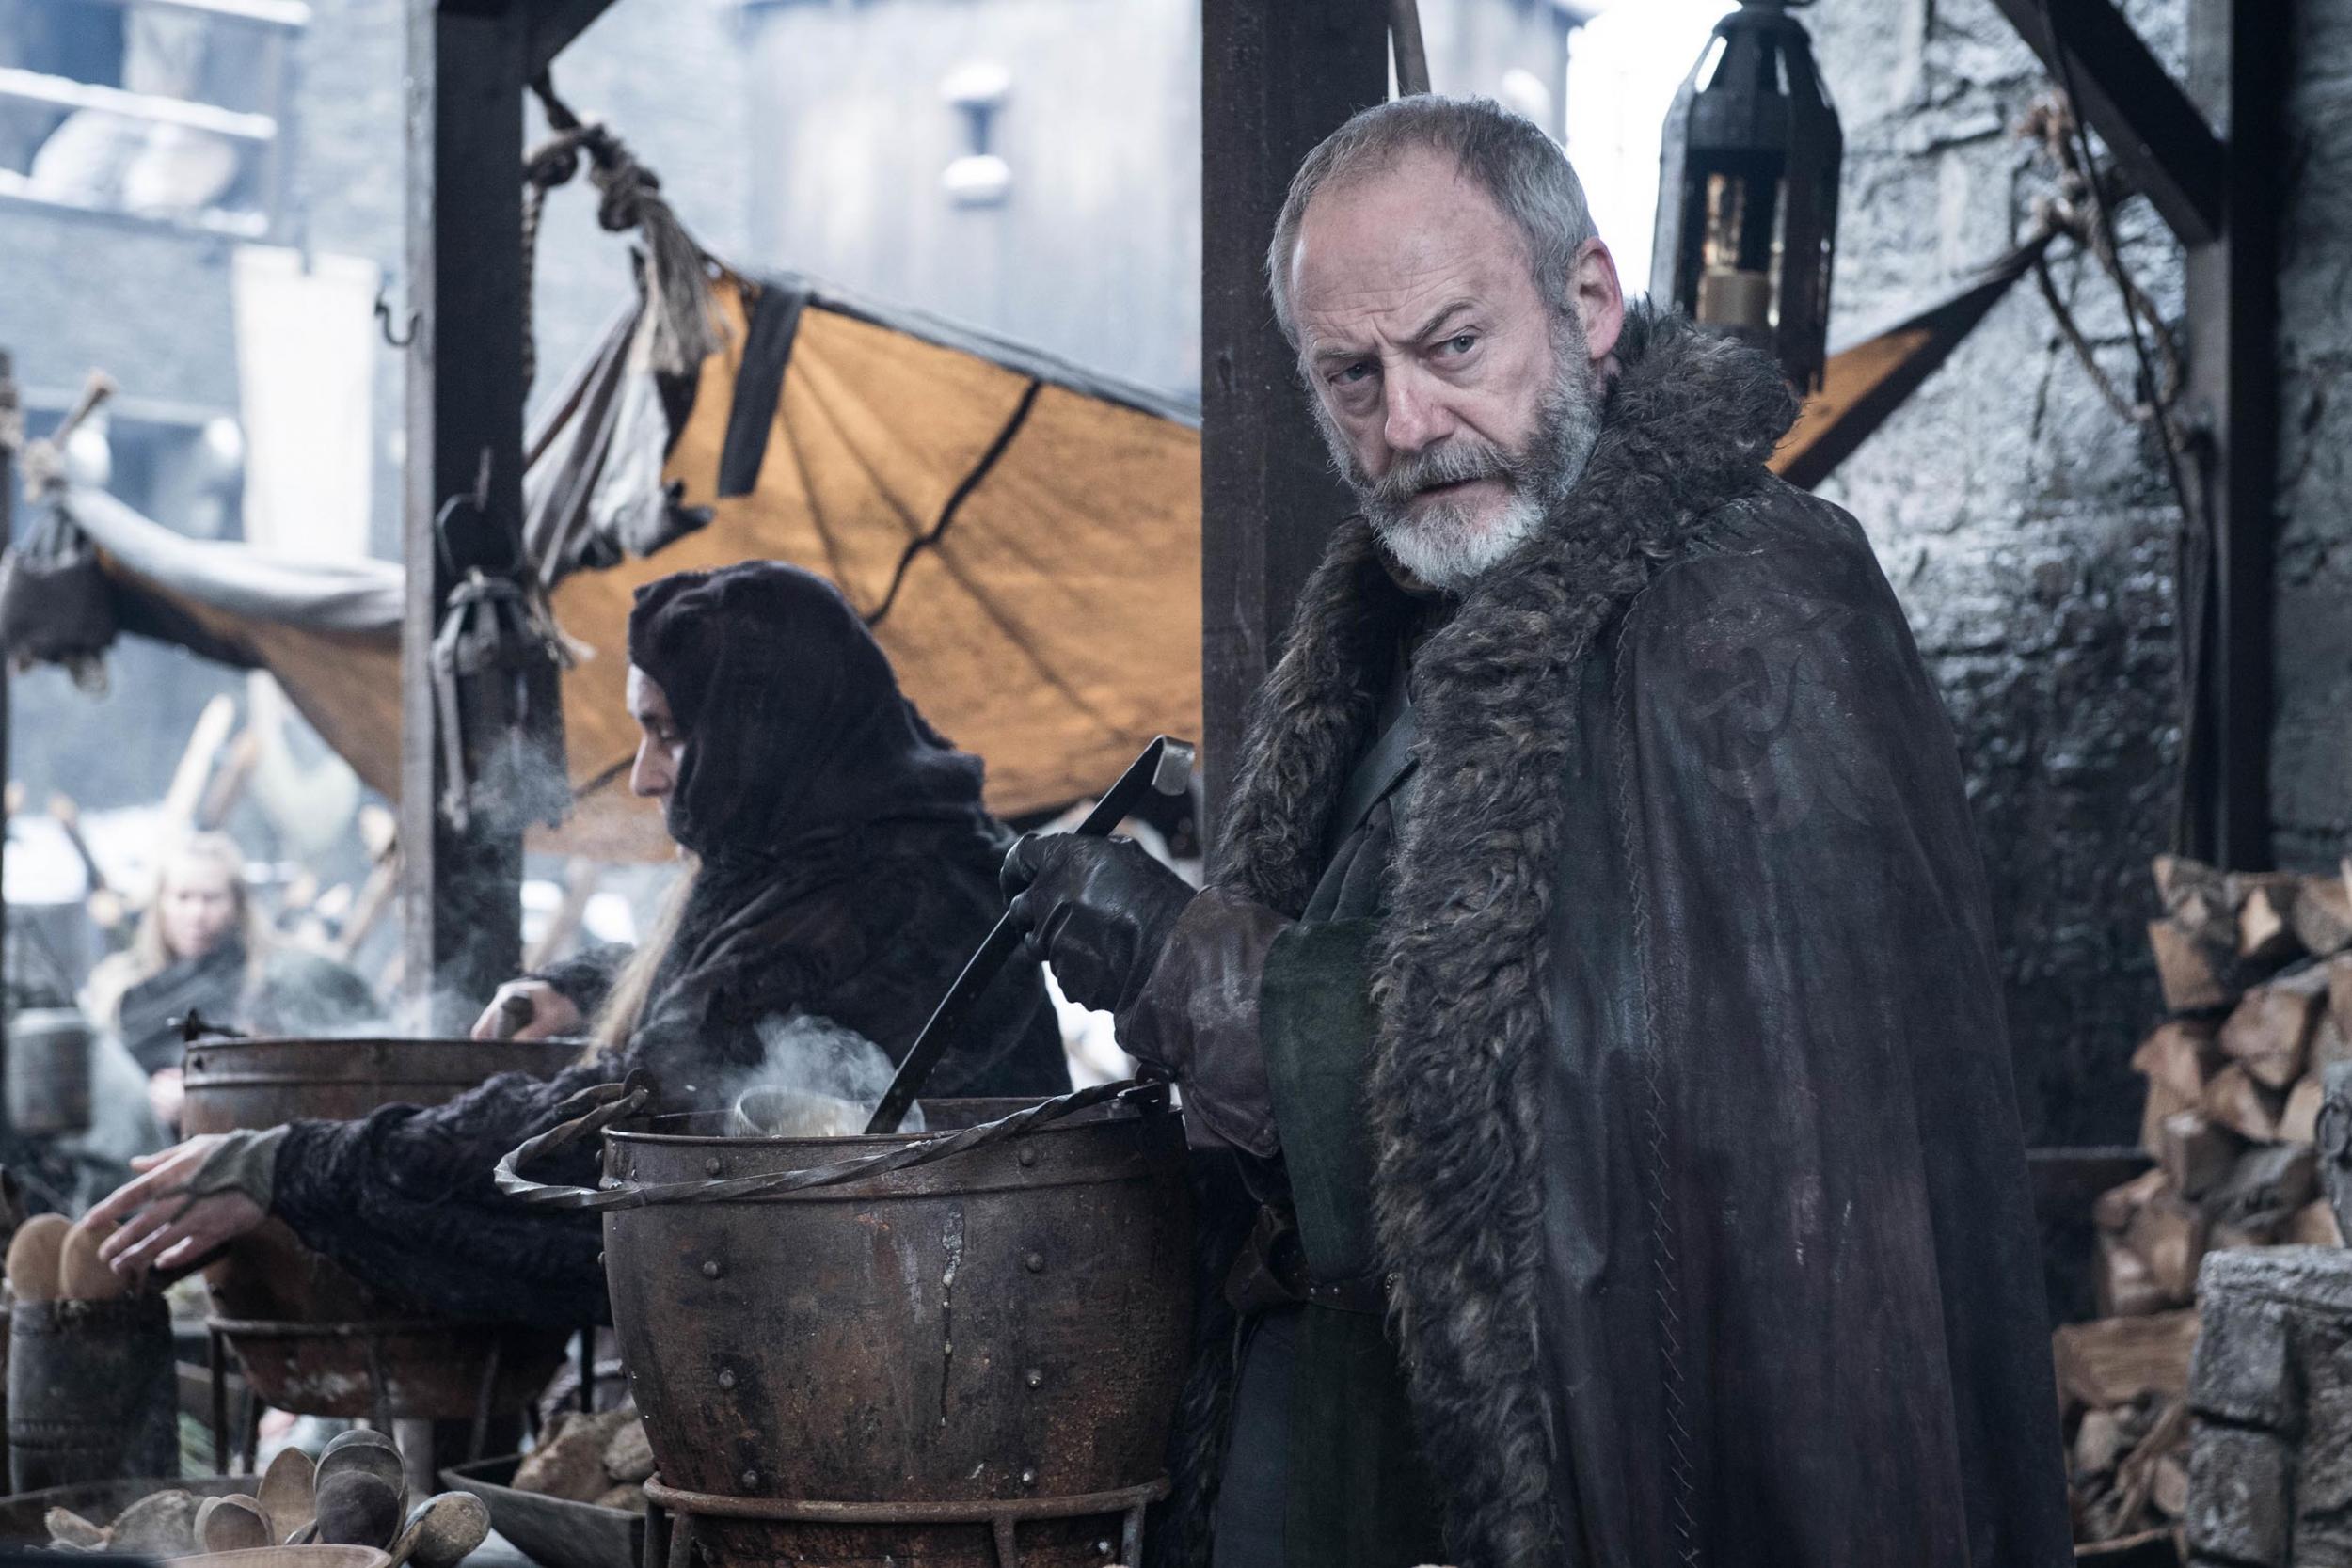 Liam Cunningham as Davos Seaworth, the Onion Knight, in the latest ‘Game of Thrones’